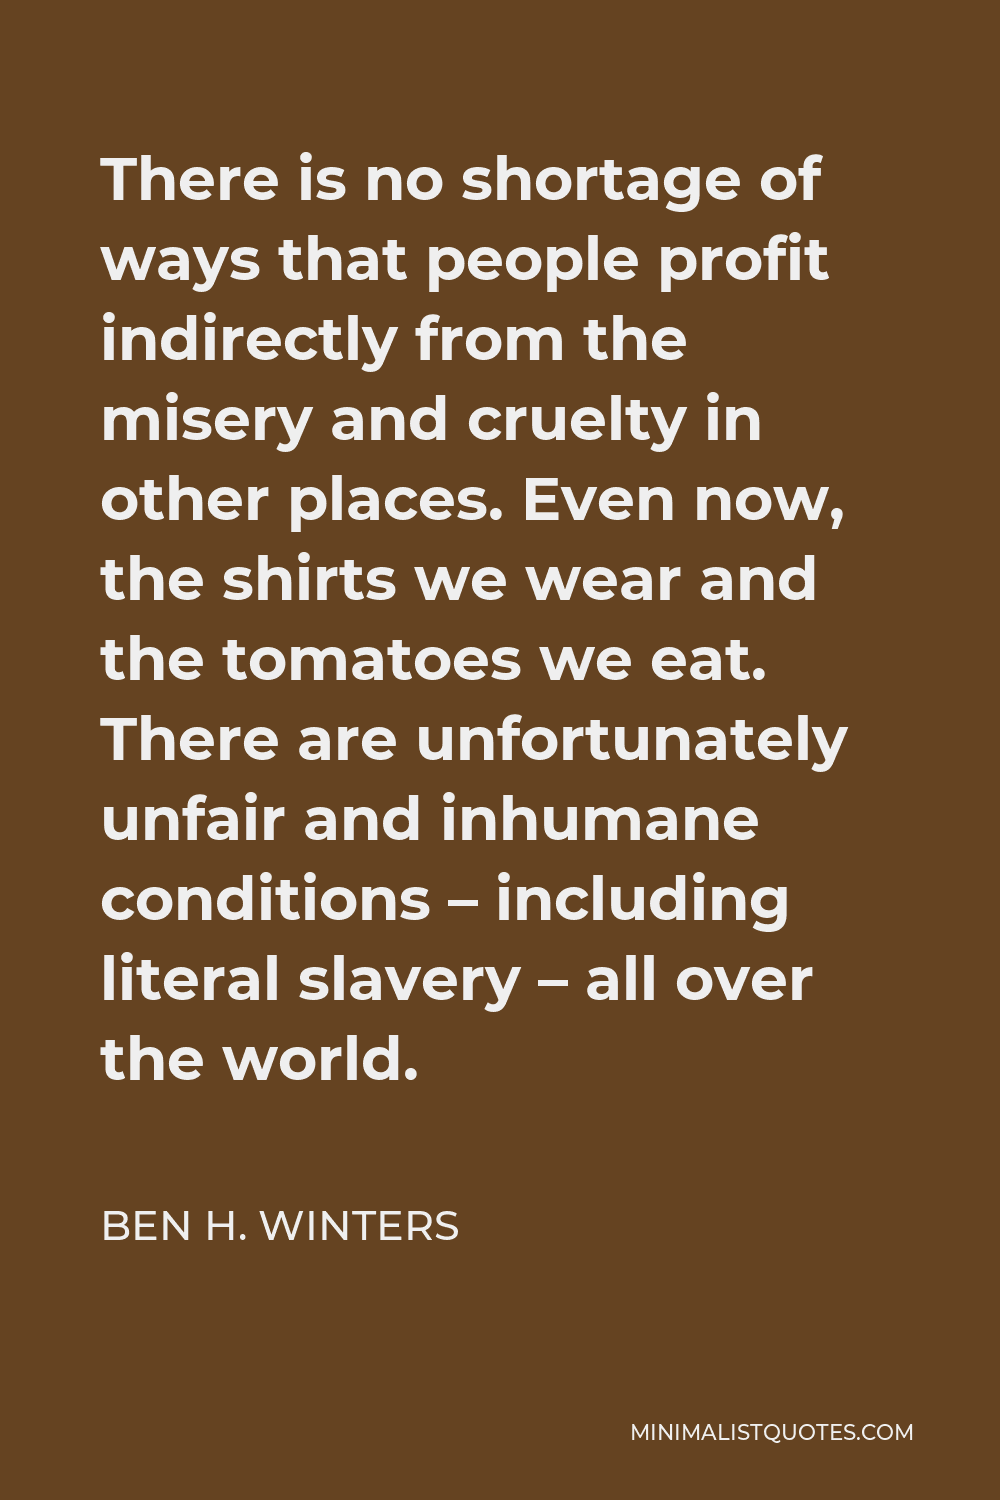 Ben H. Winters Quote - There is no shortage of ways that people profit indirectly from the misery and cruelty in other places. Even now, the shirts we wear and the tomatoes we eat. There are unfortunately unfair and inhumane conditions – including literal slavery – all over the world.